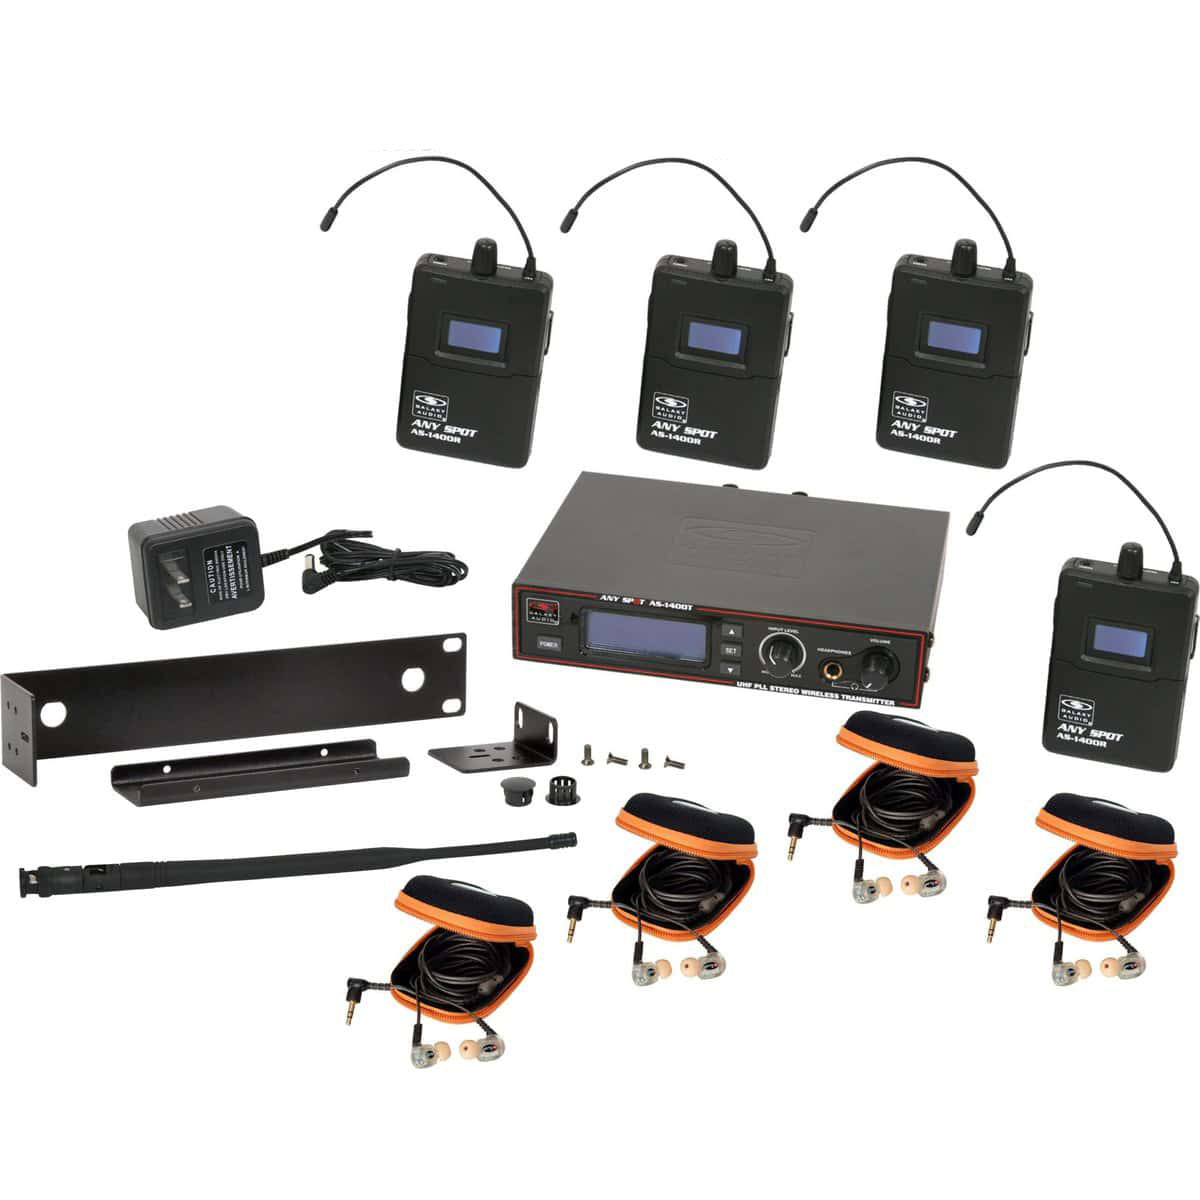 Galaxy Audio AS-1410-4 Wireless 4 In-Ear Monitor System, M 516-558 MHz